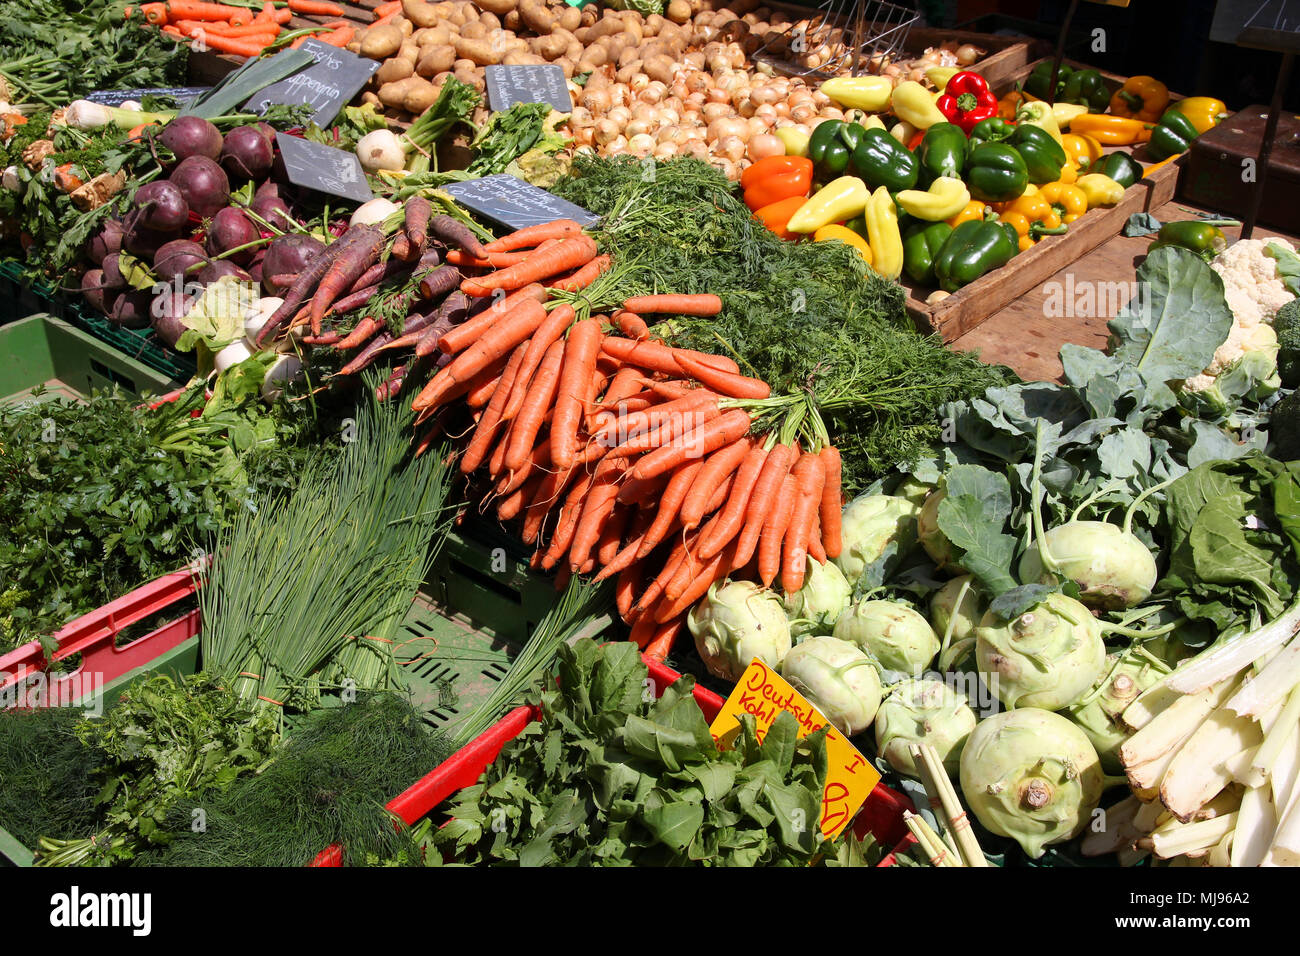 Vegetable stand at a marketplace in Mainz, Germany. Farmers market. Stock Photo